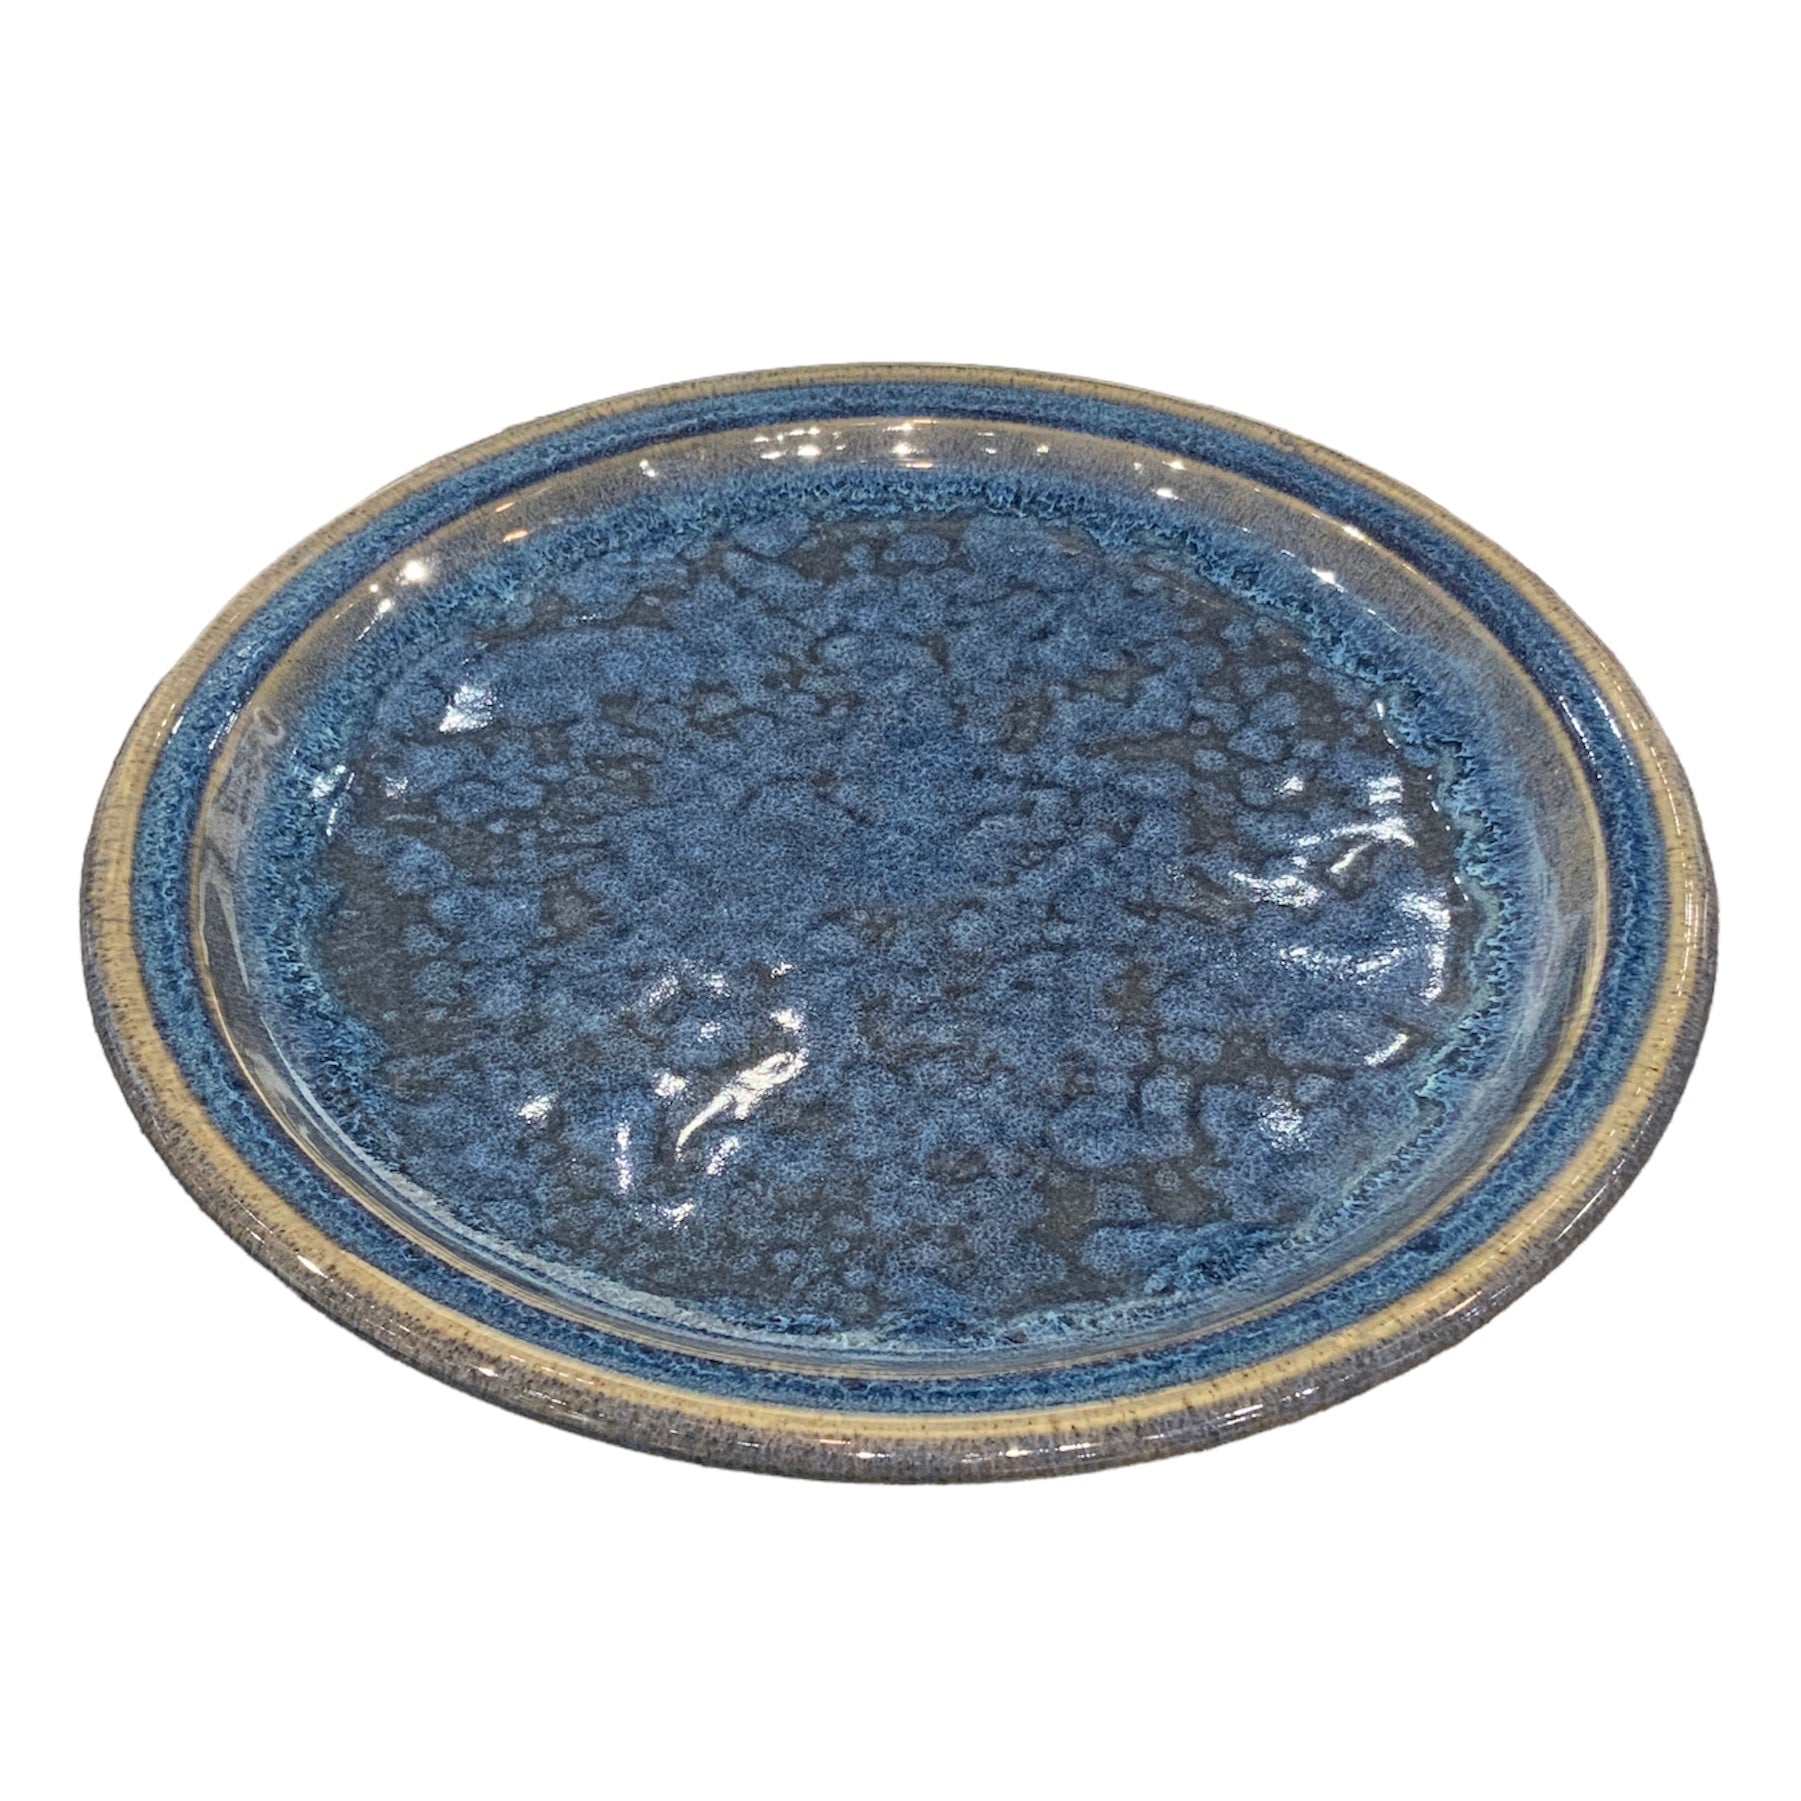 LARGE PLATE - ABSTRACT BLUE SPOTS